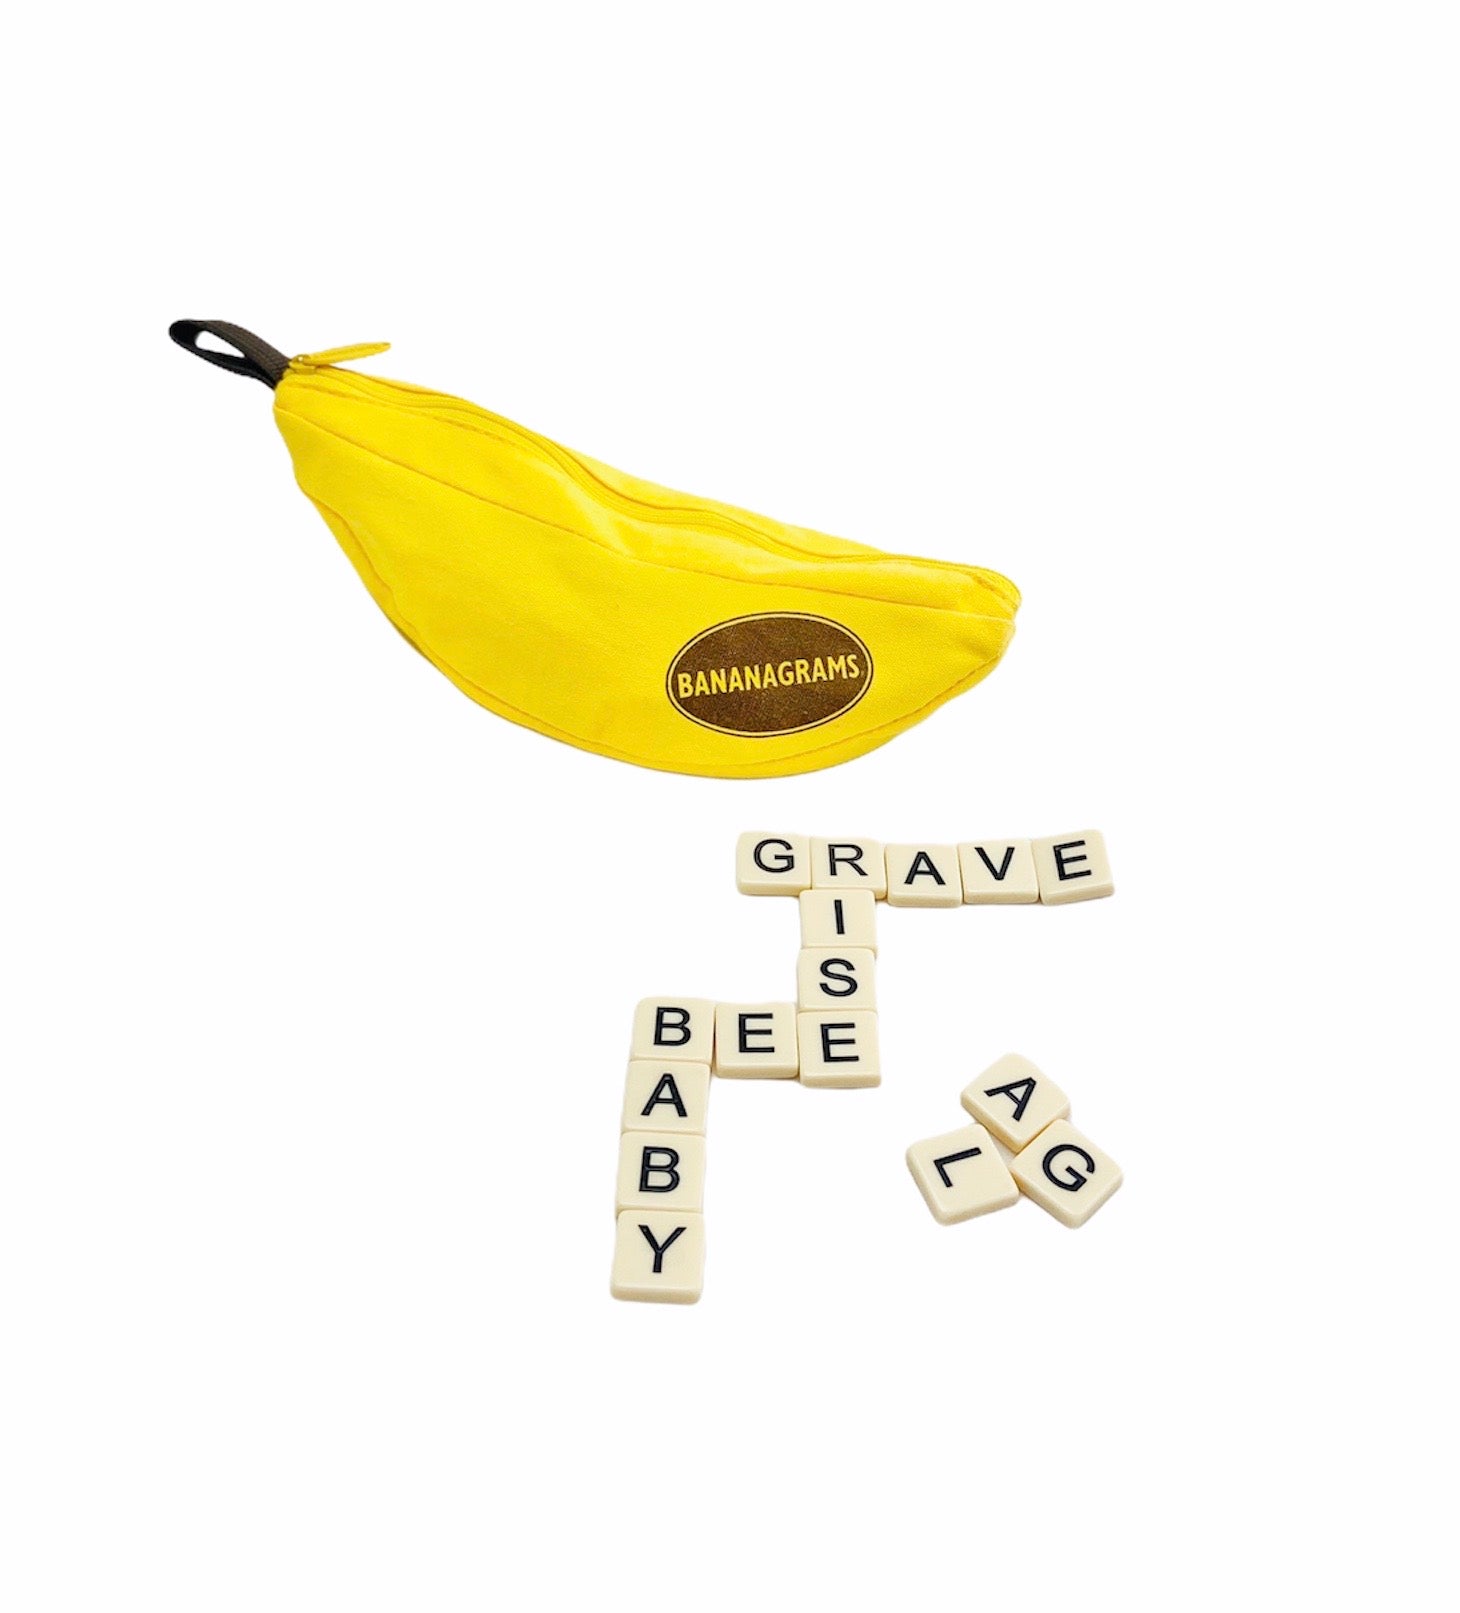 Bananagrams with banana case and tiles displayed in a word grip on a white background